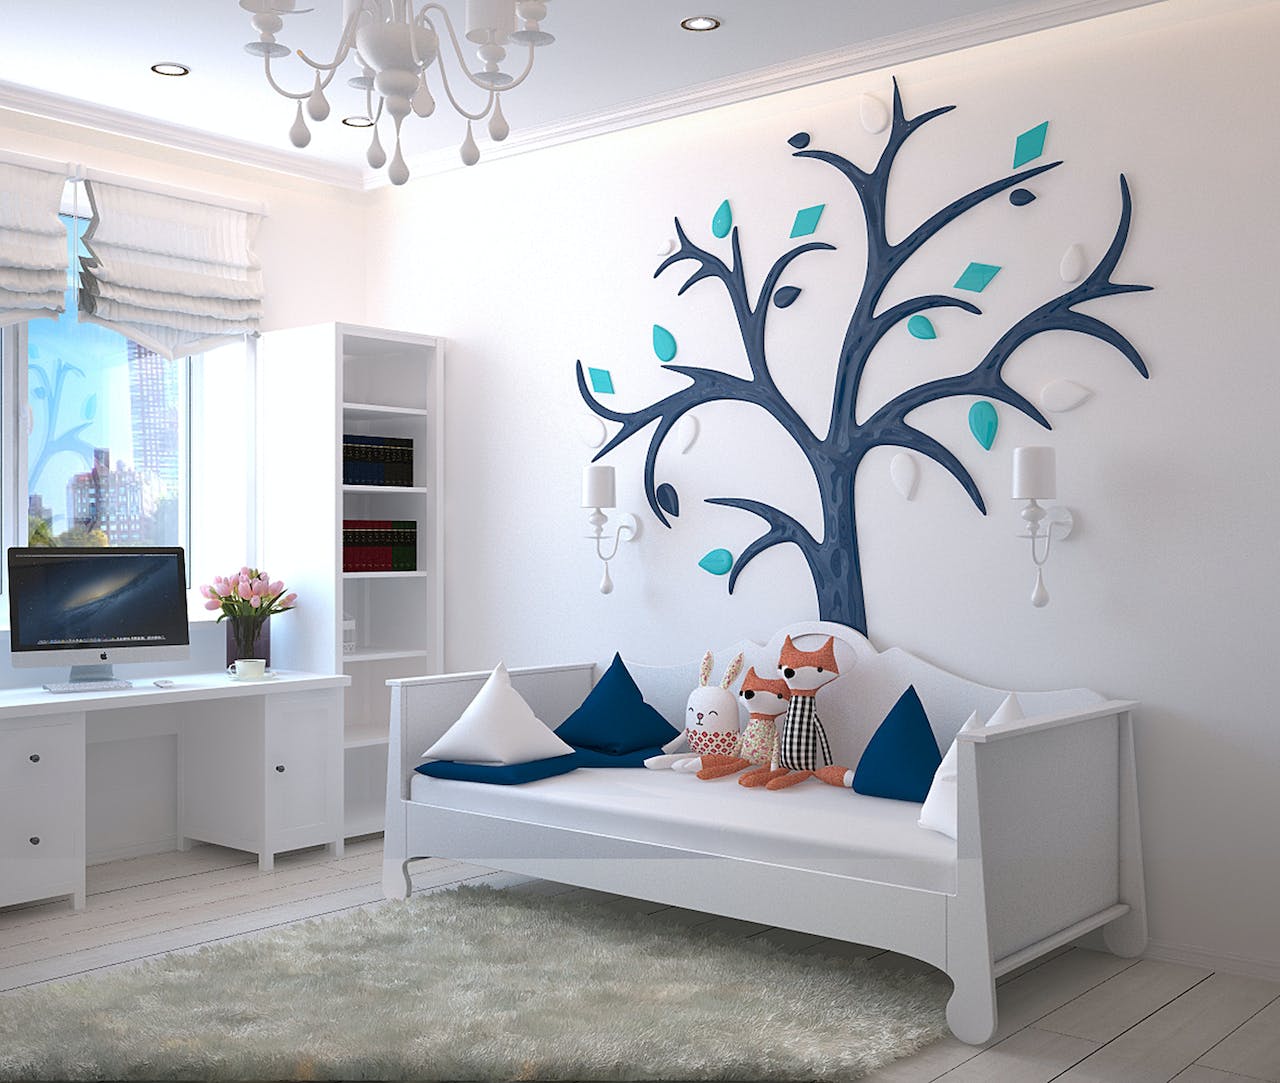 Choosing Child-Friendly Home Décor: A Parent’s Guide to Safe and Stylish Interior Design